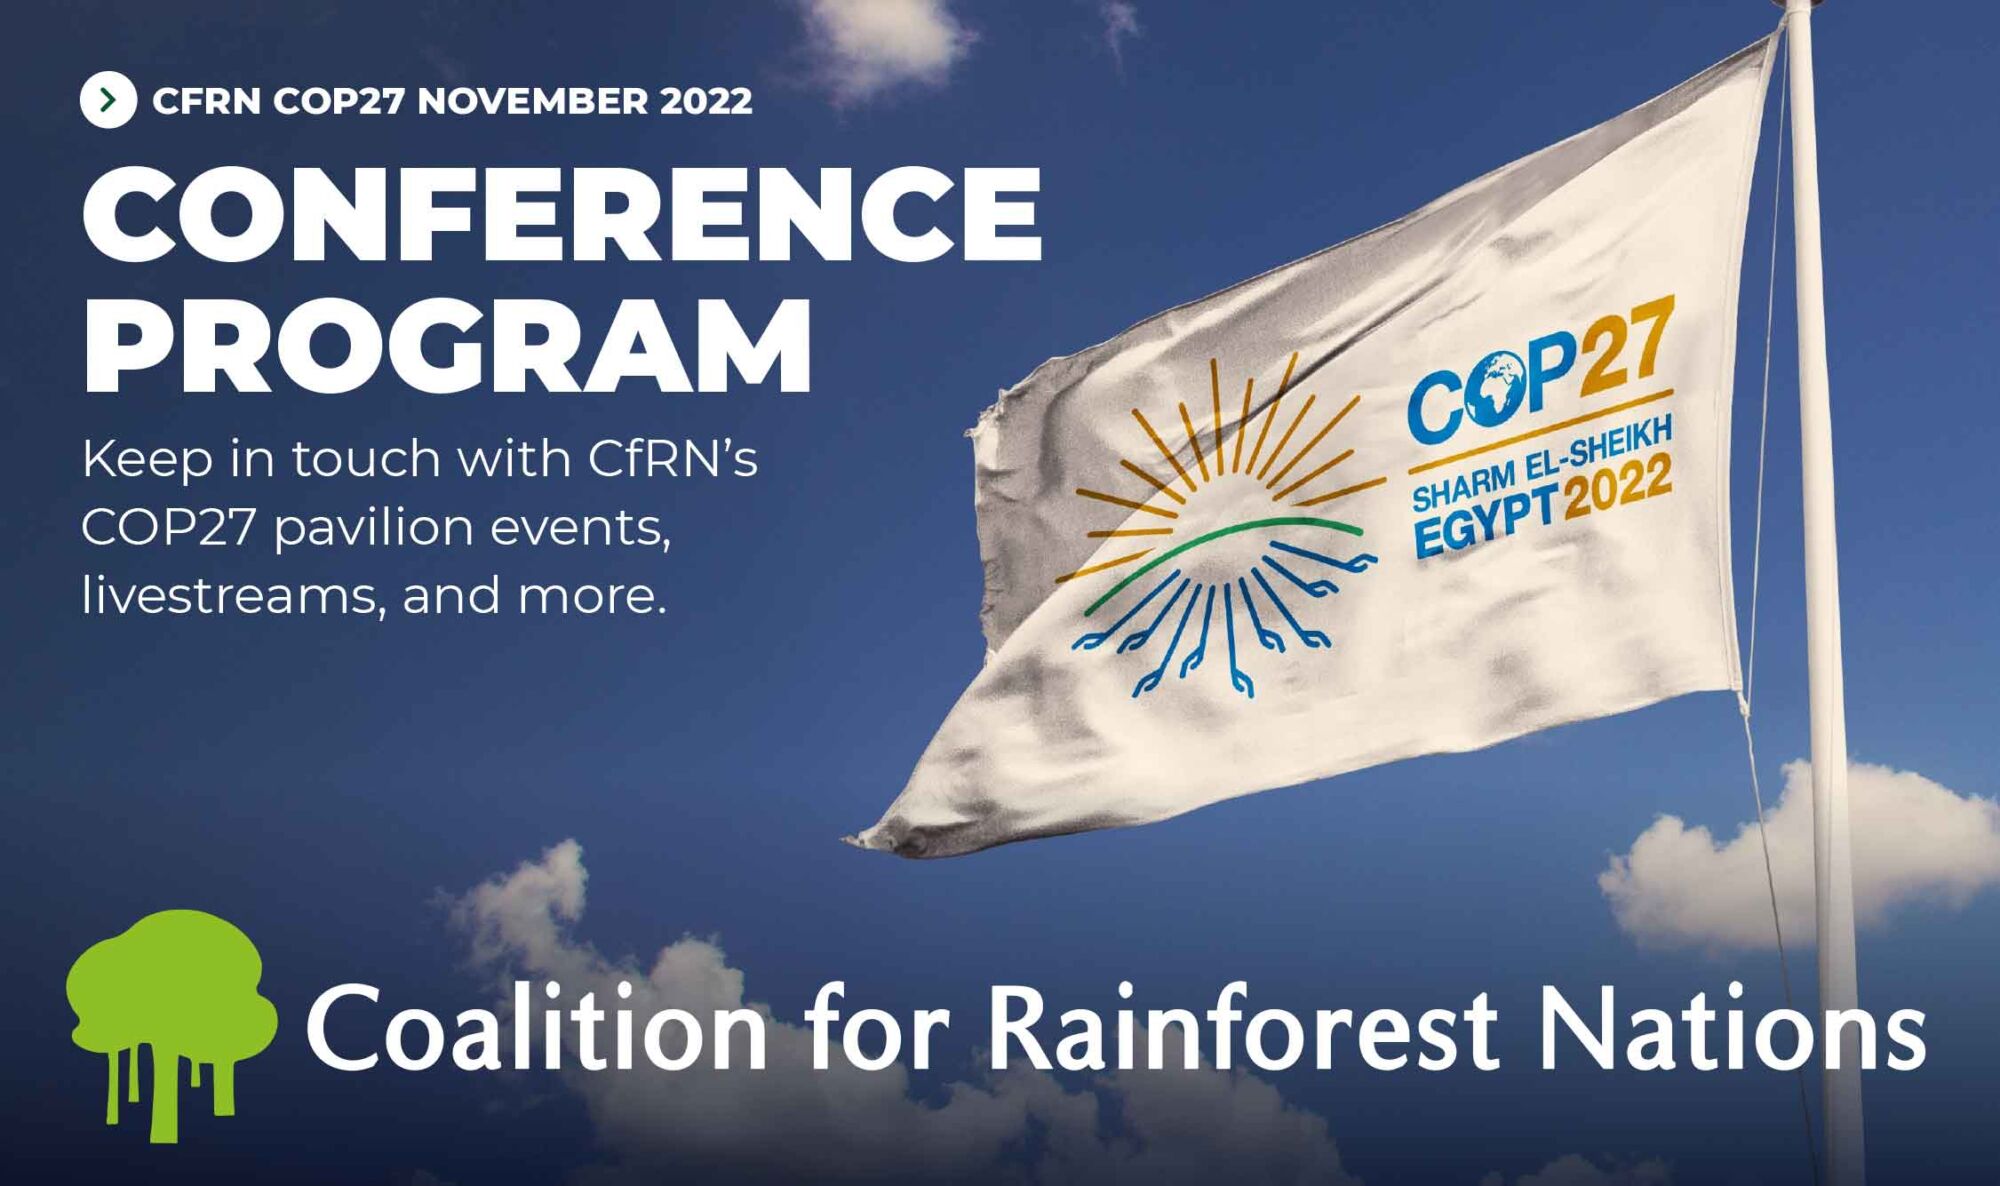 CfRN COP27 2022 - Coalition for Rainforest Nations